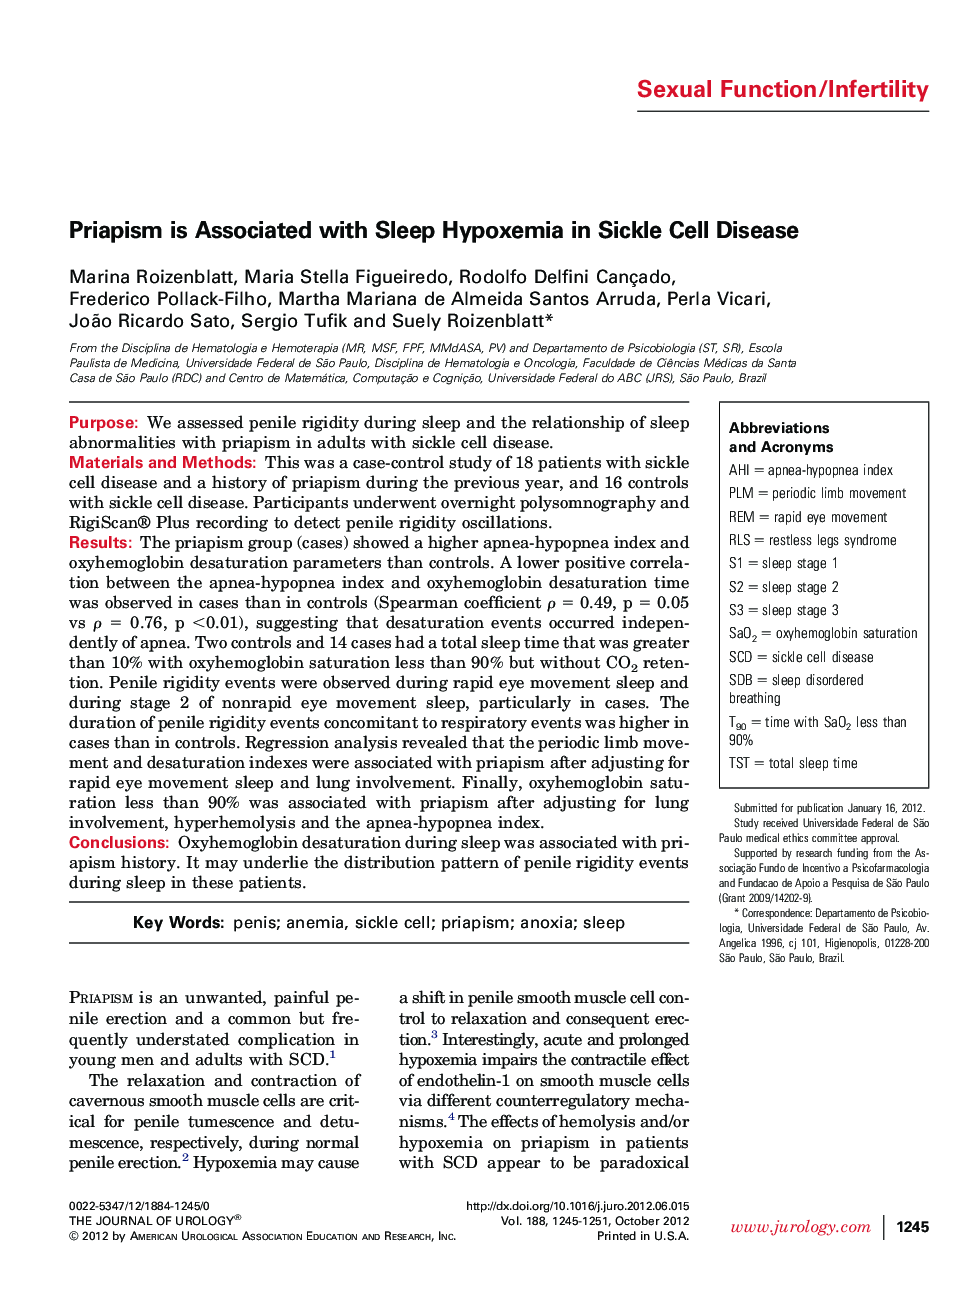 Priapism is Associated with Sleep Hypoxemia in Sickle Cell Disease